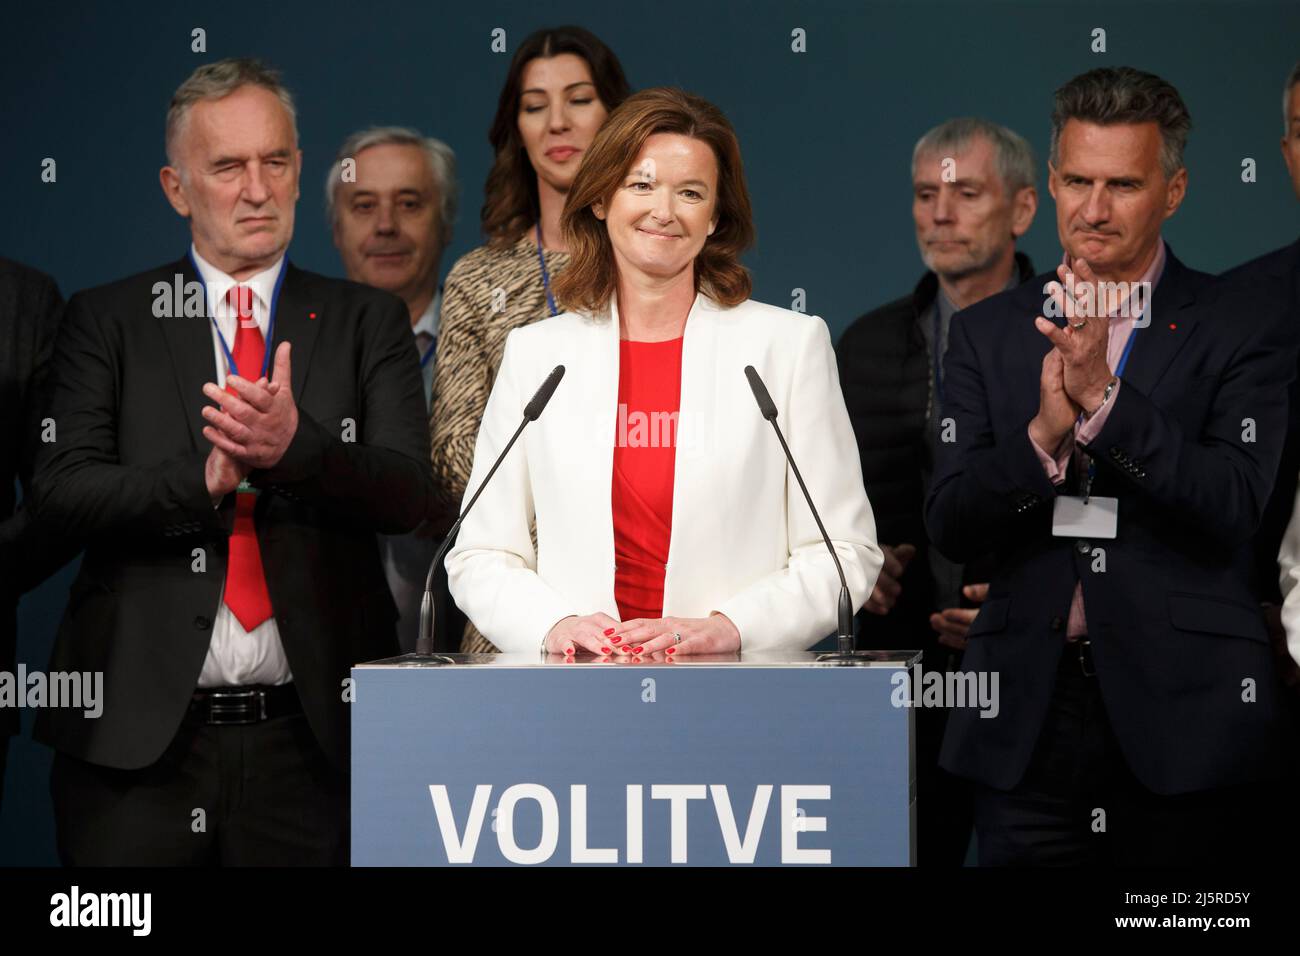 Ljubljana, Slovenia. 24th Apr, 2022. Tanja Fajon (front), the leader of Social Democrat, addresses her party at the media center in Ljubljana, Slovenia, April 24, 2022. Freedom Movement (FM), a new center-left party, recorded a landslide victory at Slovenia's general election on Sunday, defeating the center-right Slovenian Democratic Party led by Prime Minister Janez Jansa. Credit: Zeljko Stevanic/Xinhua/Alamy Live News Stock Photo